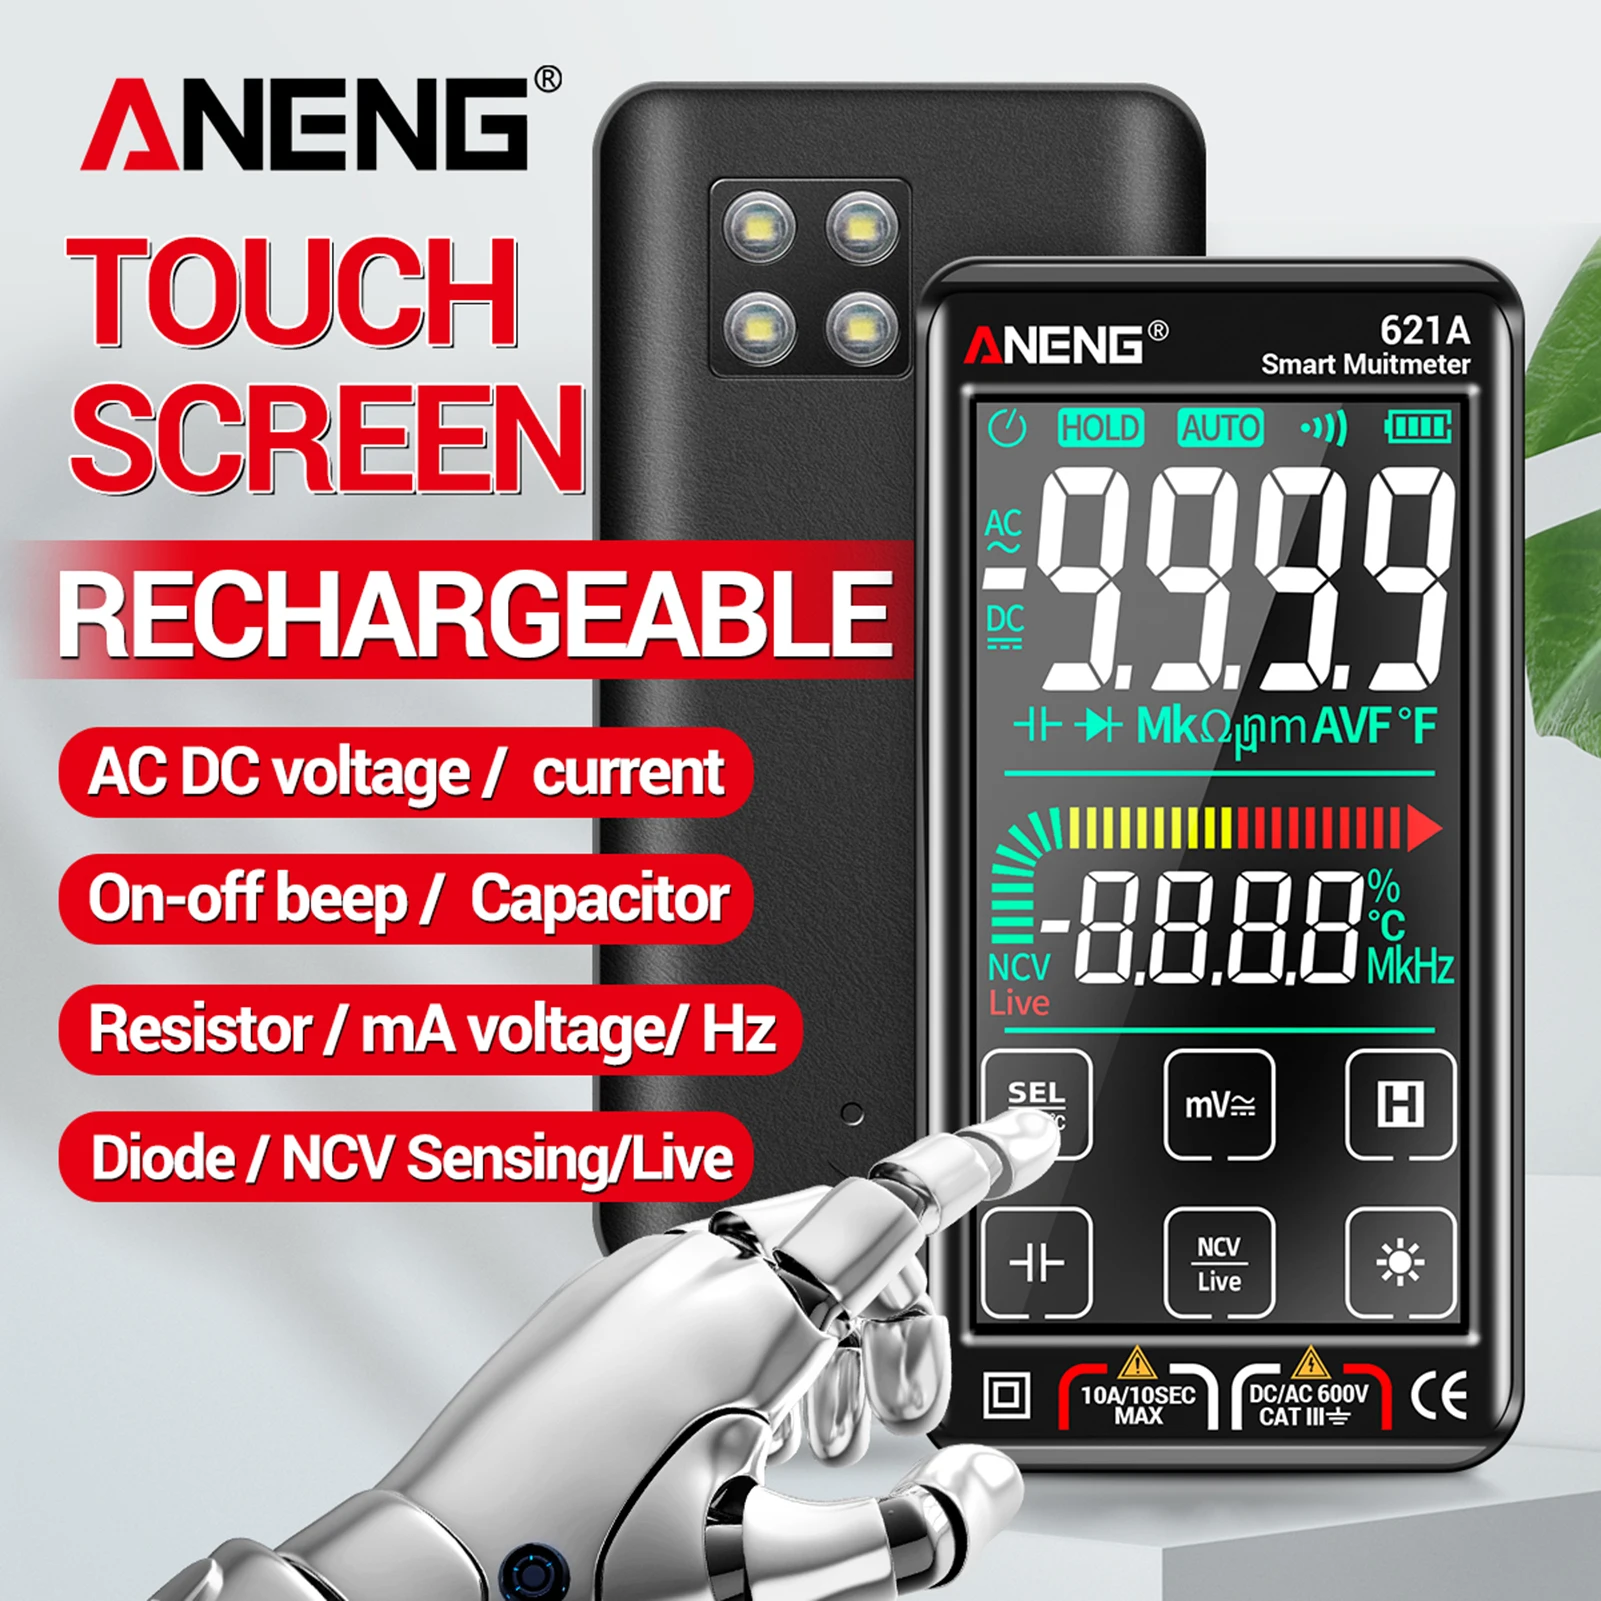 

ANENG 621A Digital Smart Multimeter Transistor Testers 9999 Counts True RMS Auto Electrical Capacitance Meter Temp Resistance